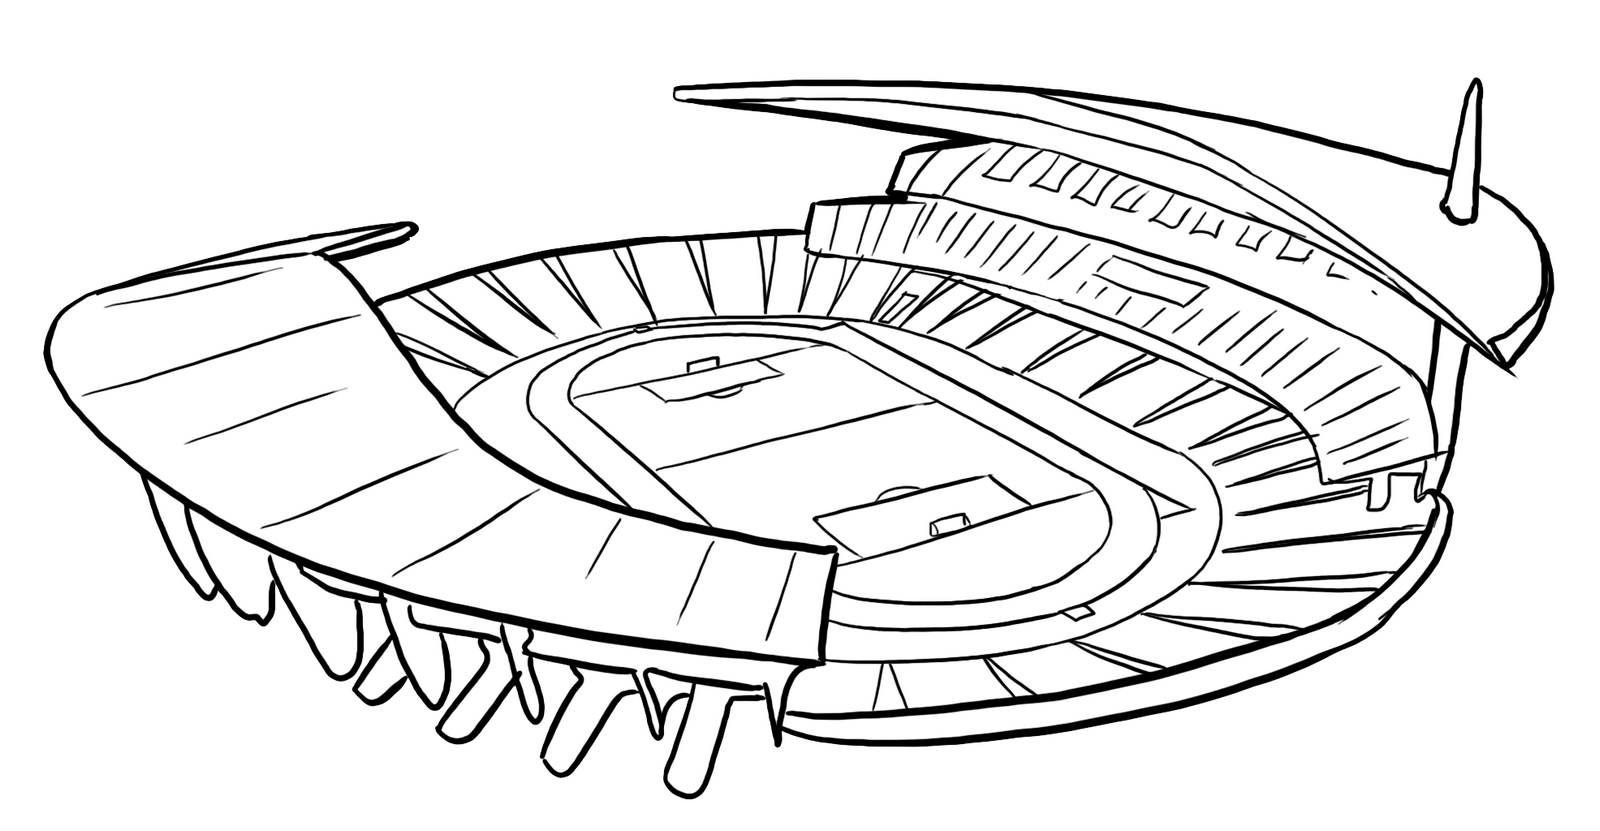 international stadium coloring page | World cup stadiums, Coloring pages,  World cup